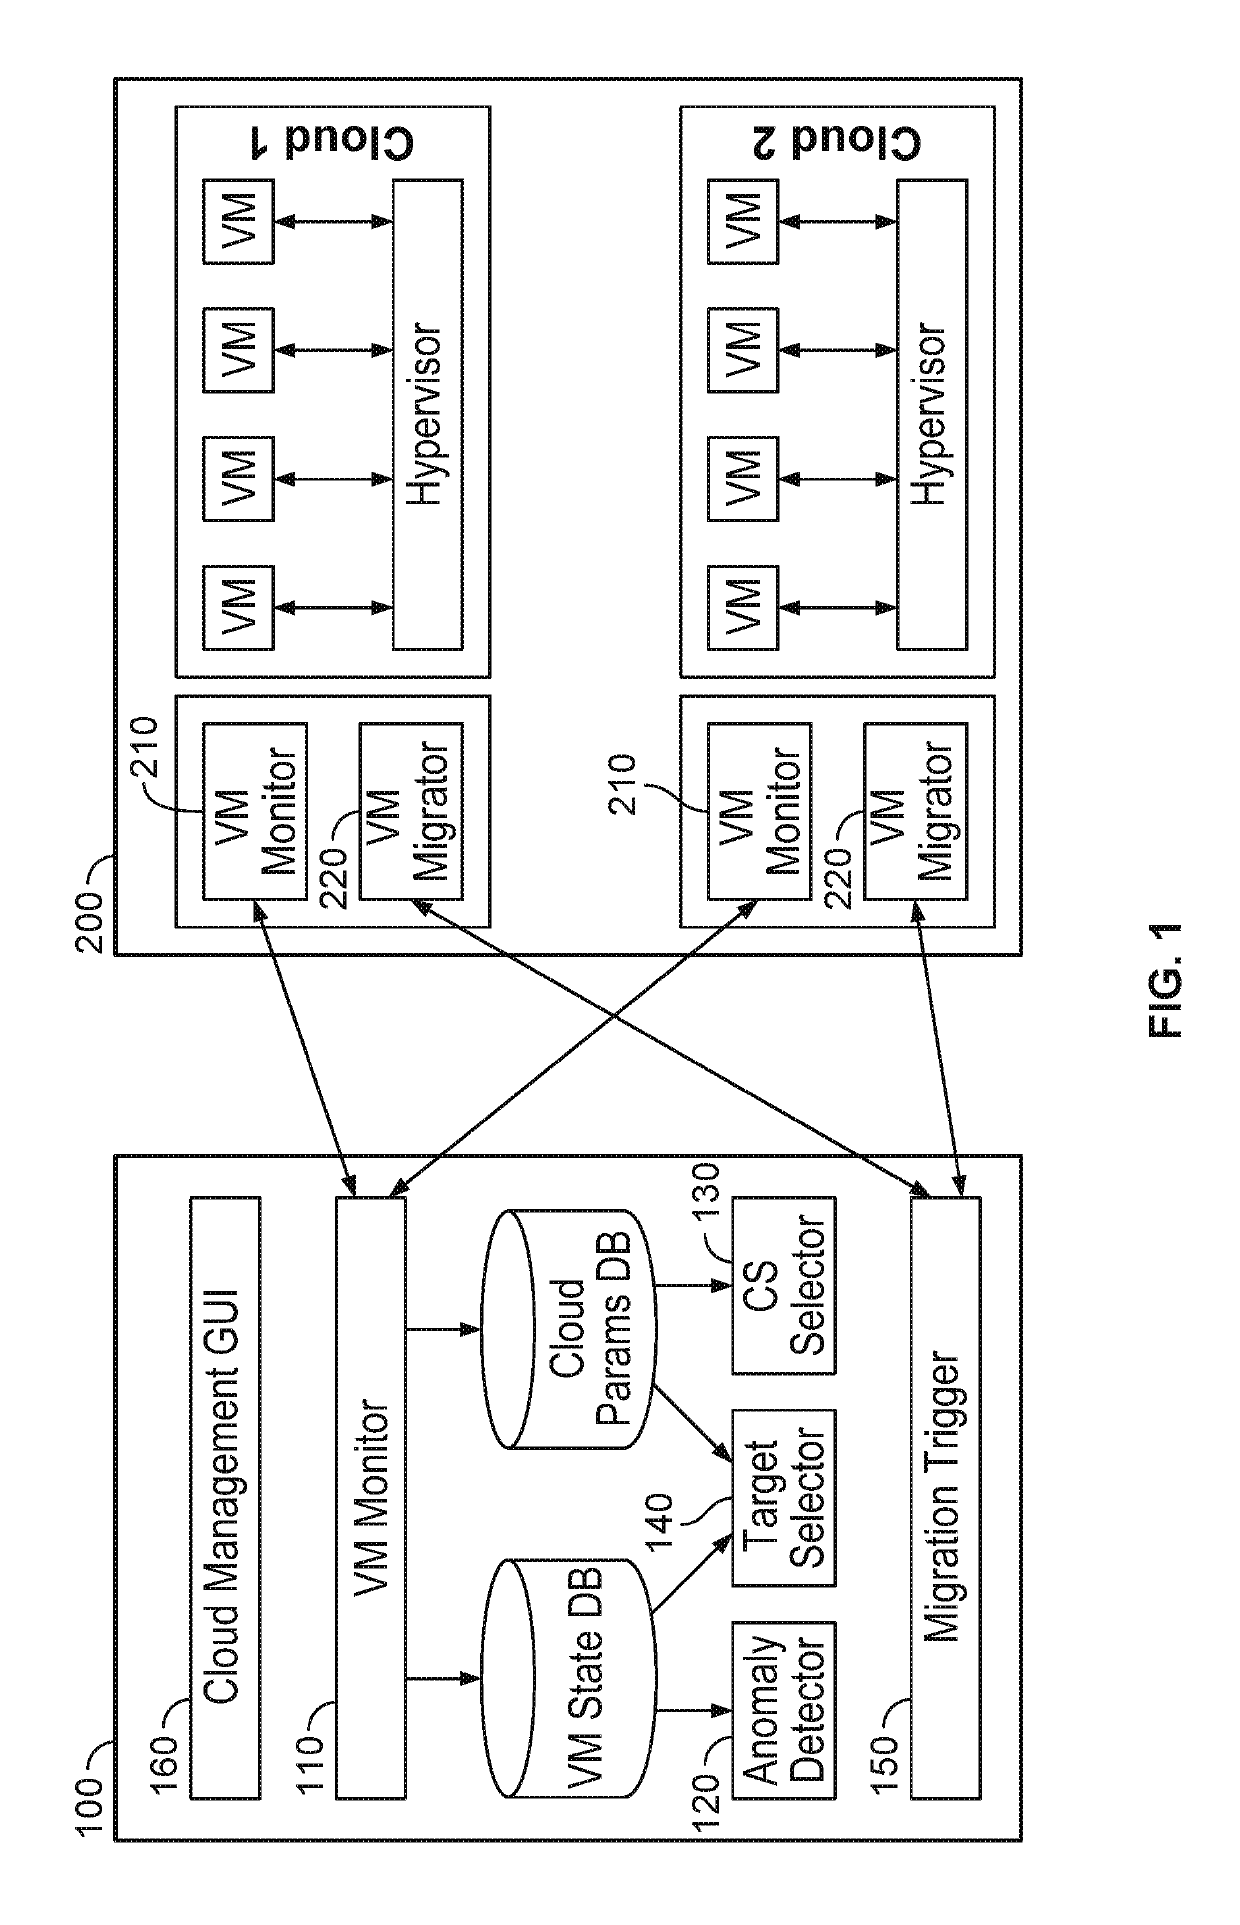 System and method for automatically triggering the live migration of cloud services and automatically performing the triggered migration